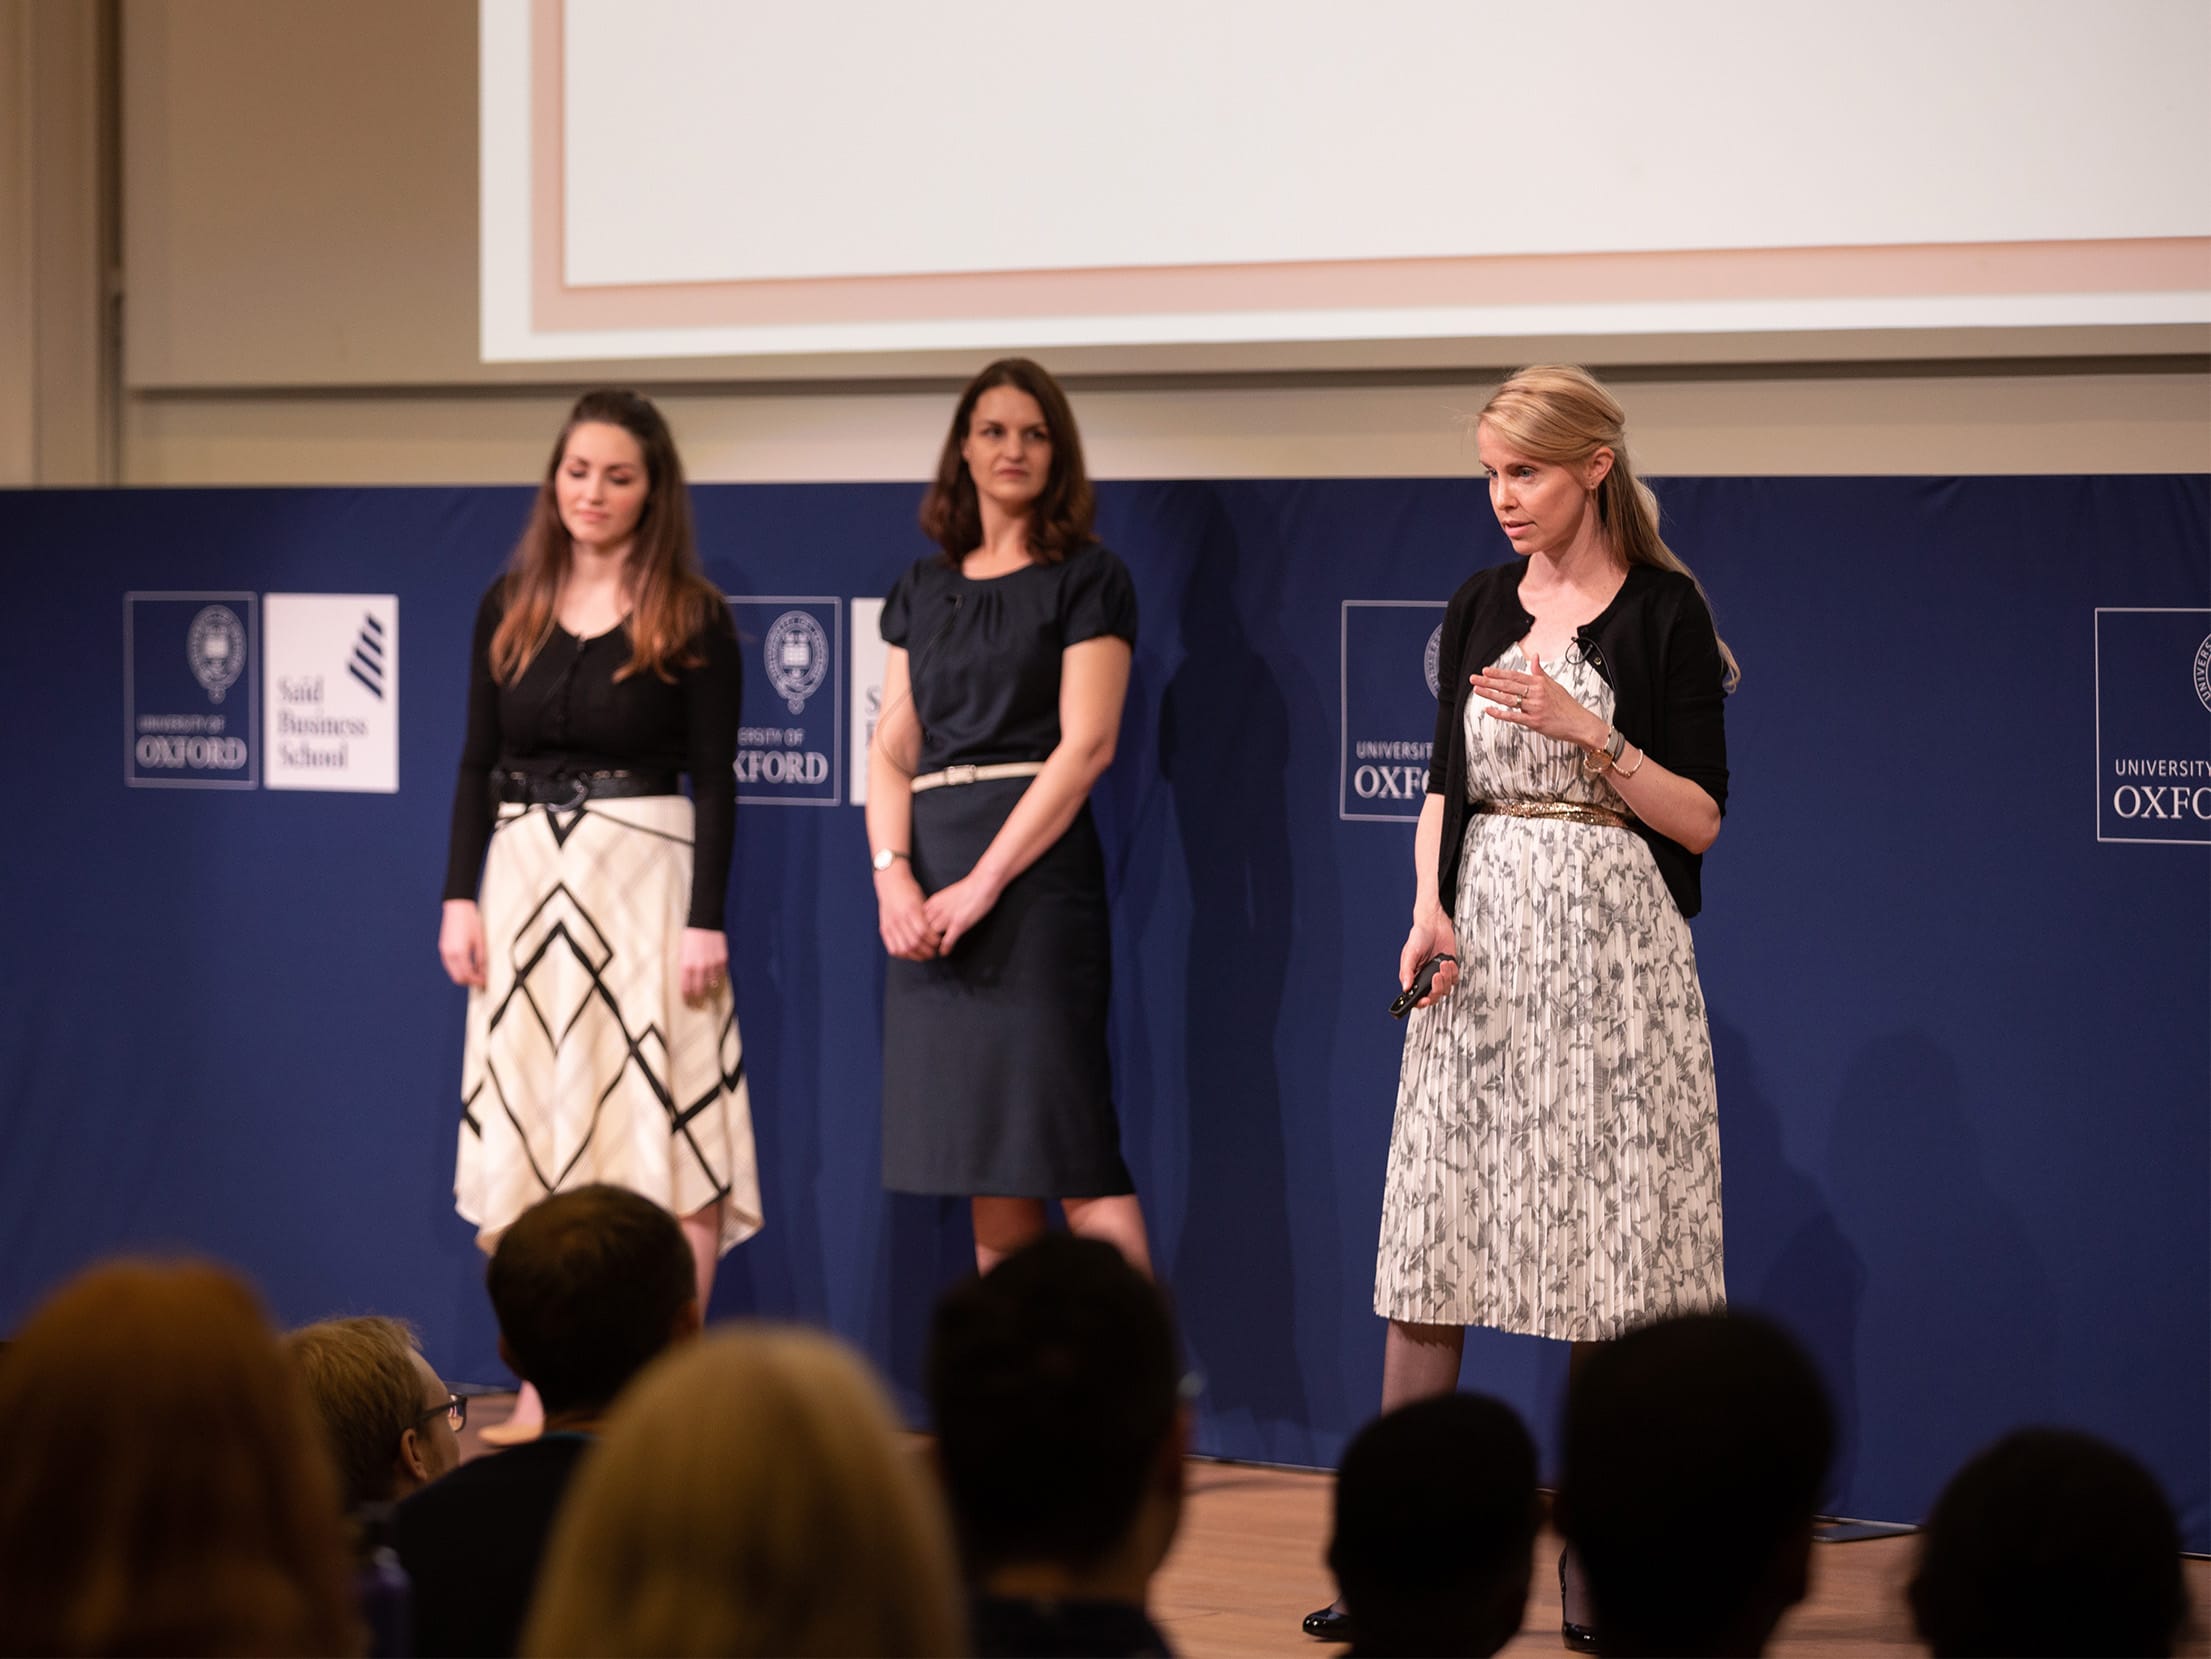 University of Oxford's finalists, team daughters presenting on stage